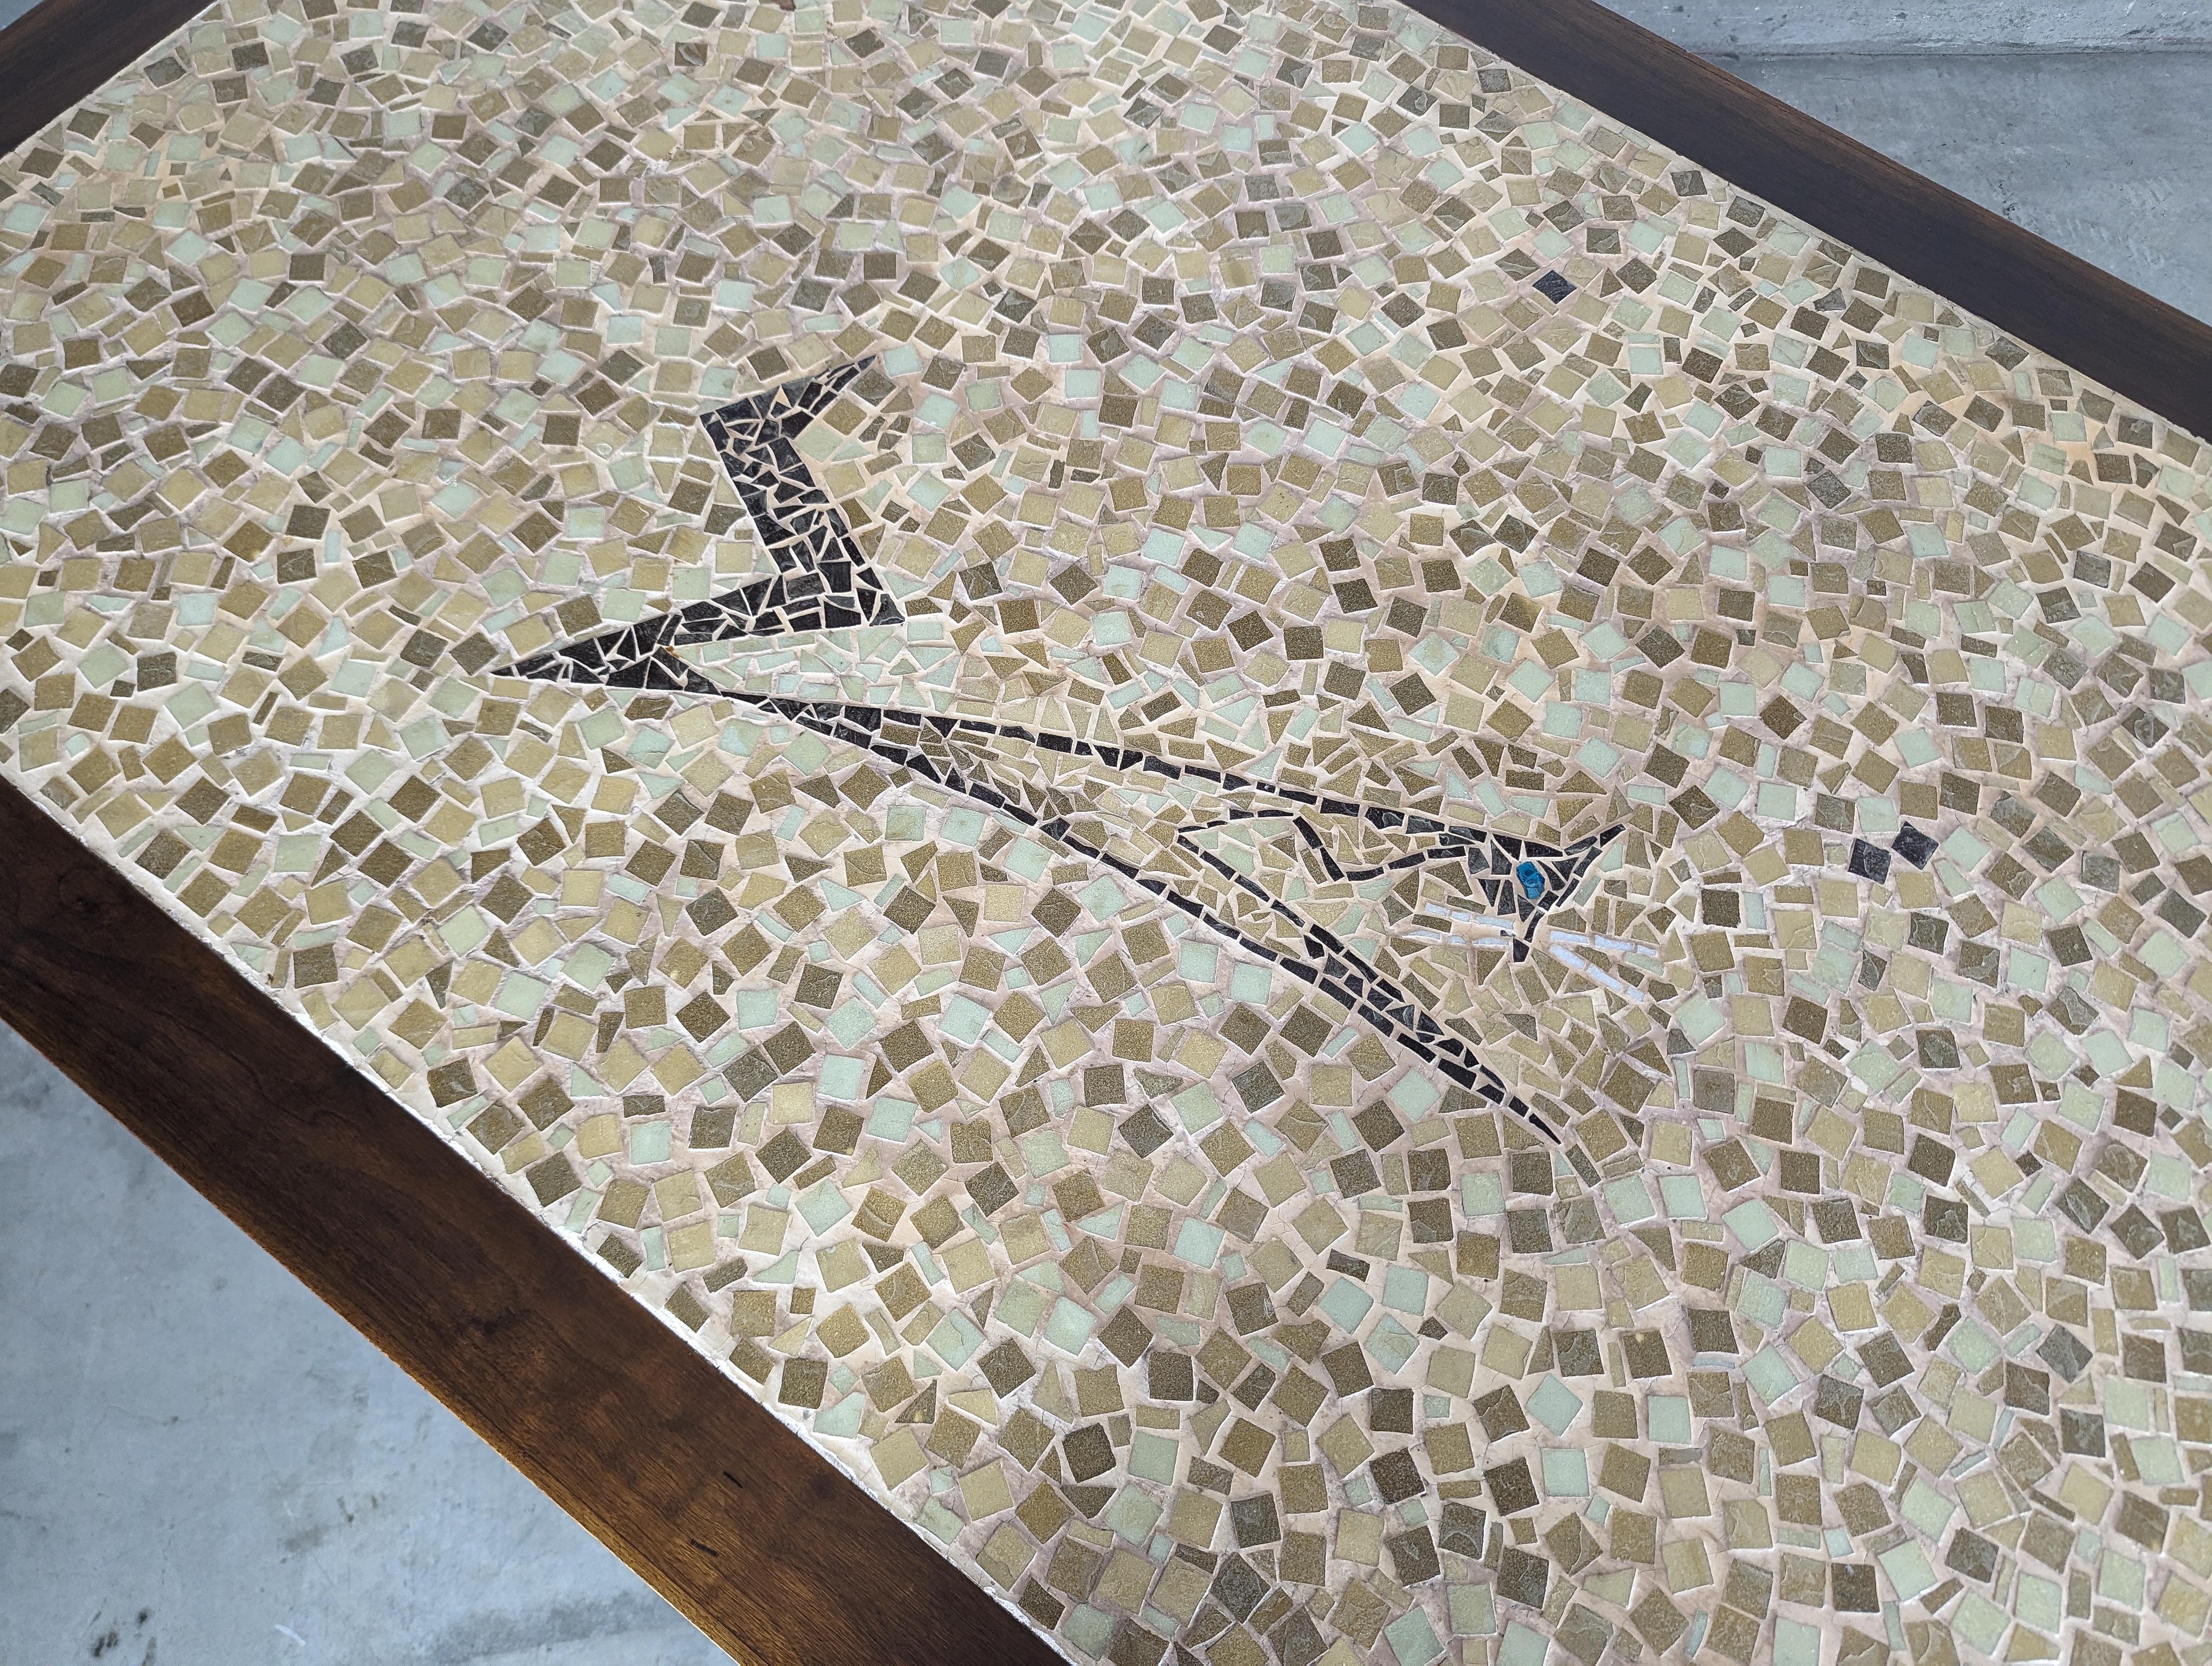 Late 20th Century Mid Century Modern Walnut Dining Table with Mosaic Ceramic Tiled Top, c1970s For Sale